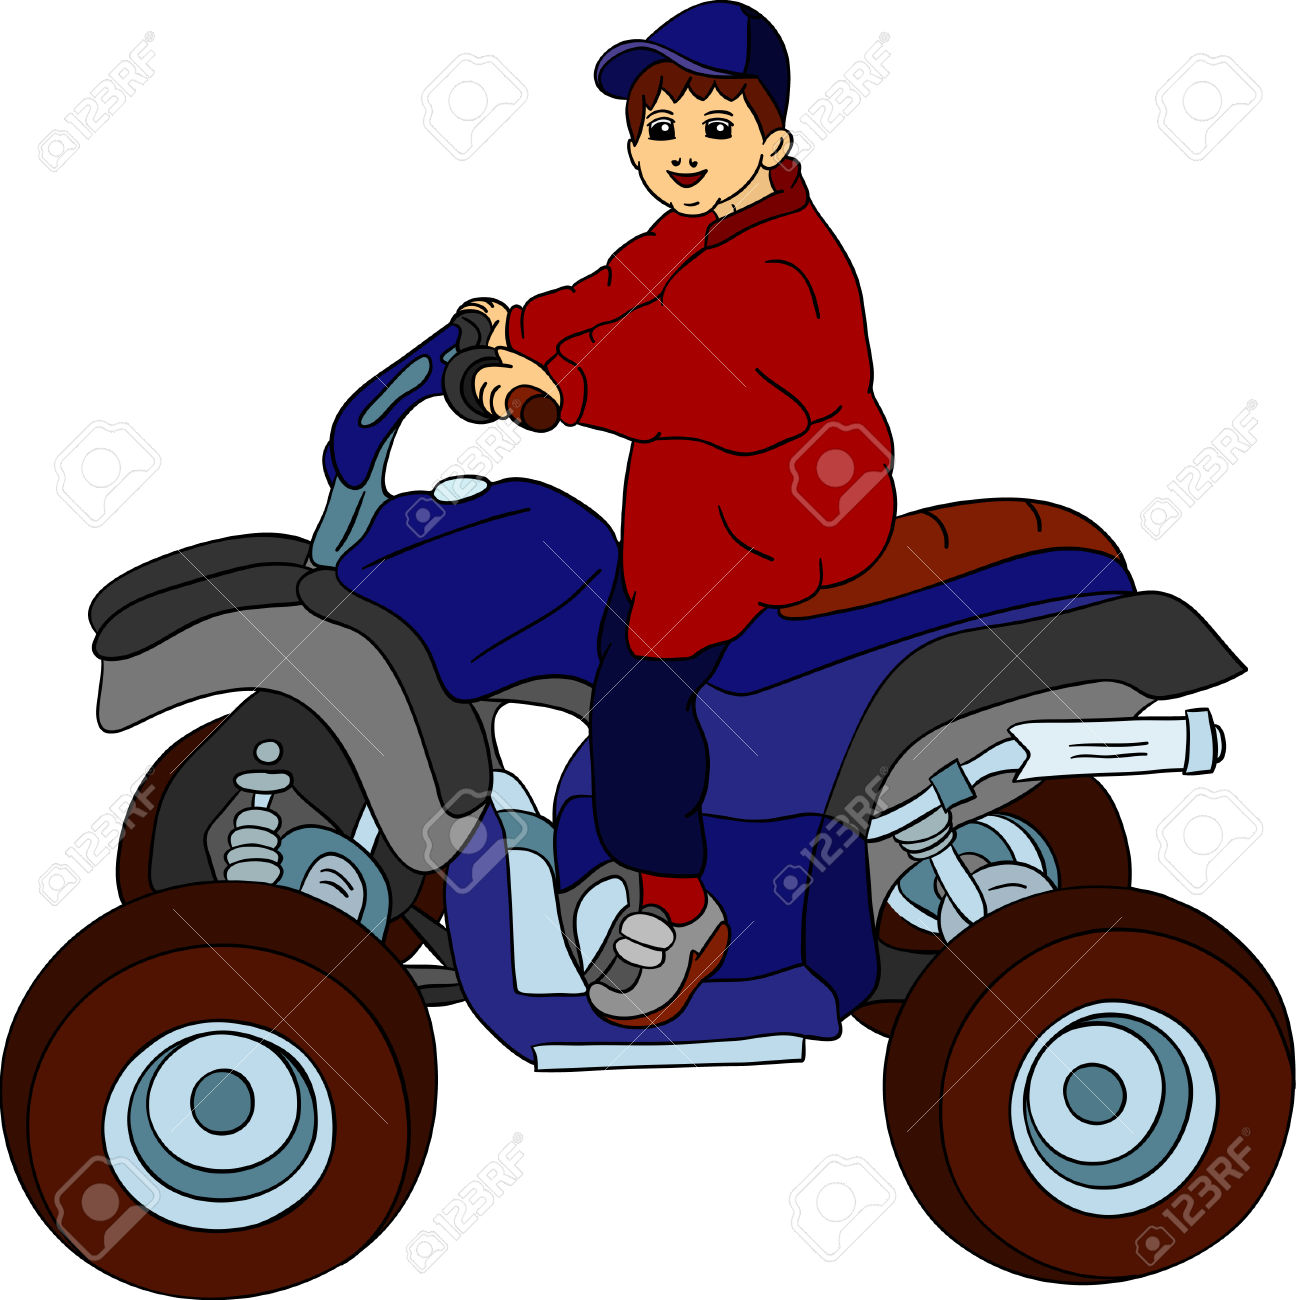 Showing post & media for Cartoon riding quads.